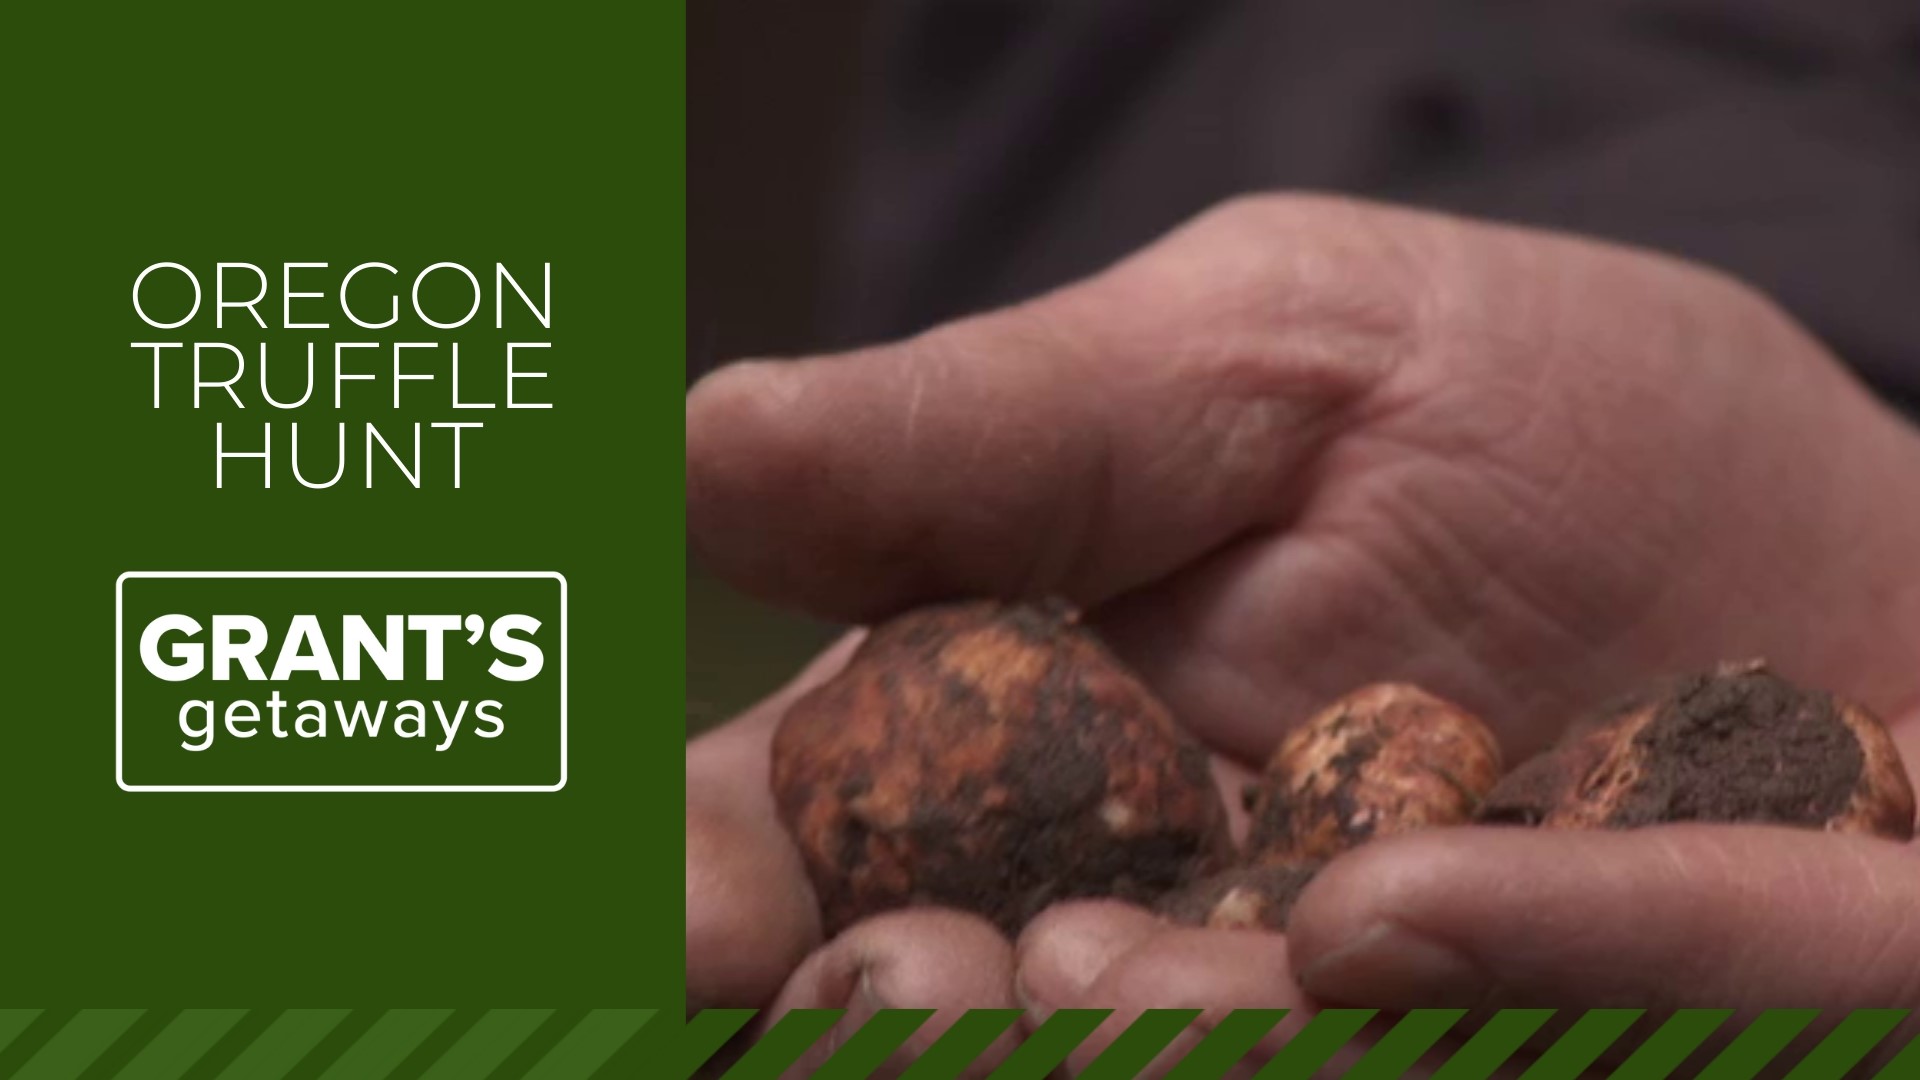 This week we take a trip with man's best friend, sniffing out some hidden riches — underground Oregon truffles.